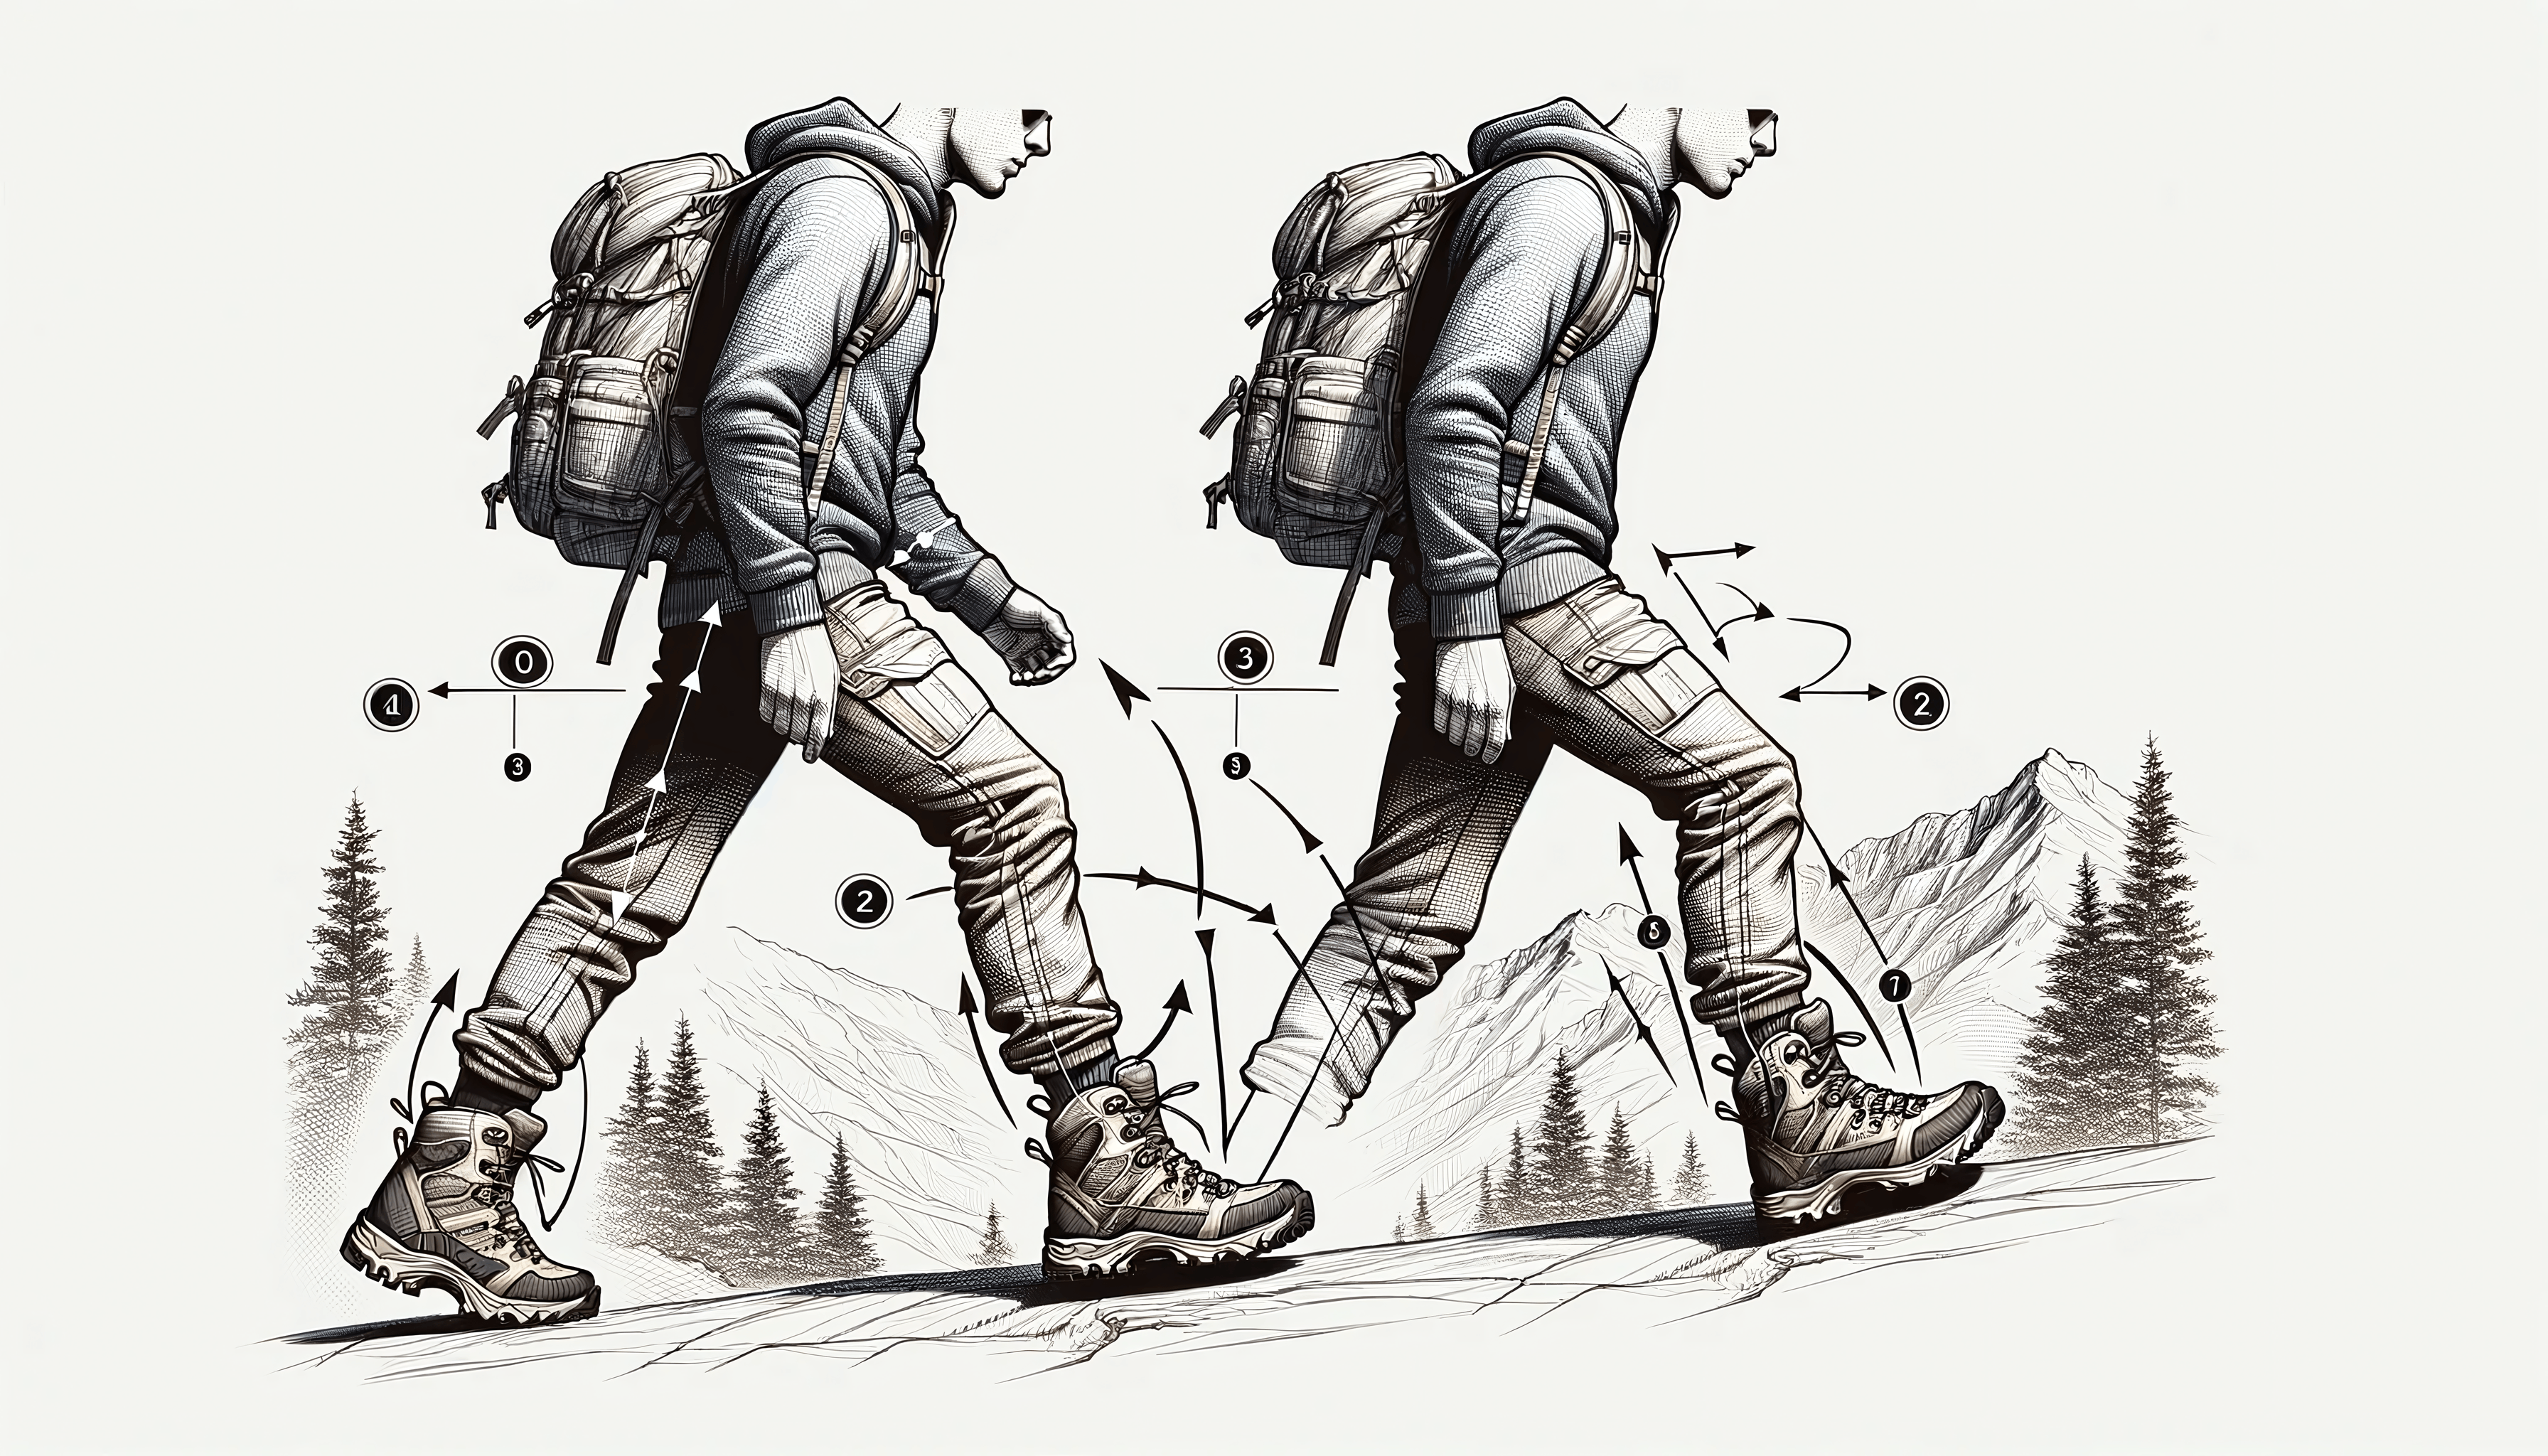 How to Wear in New Hiking Boots for Maximum Comfort